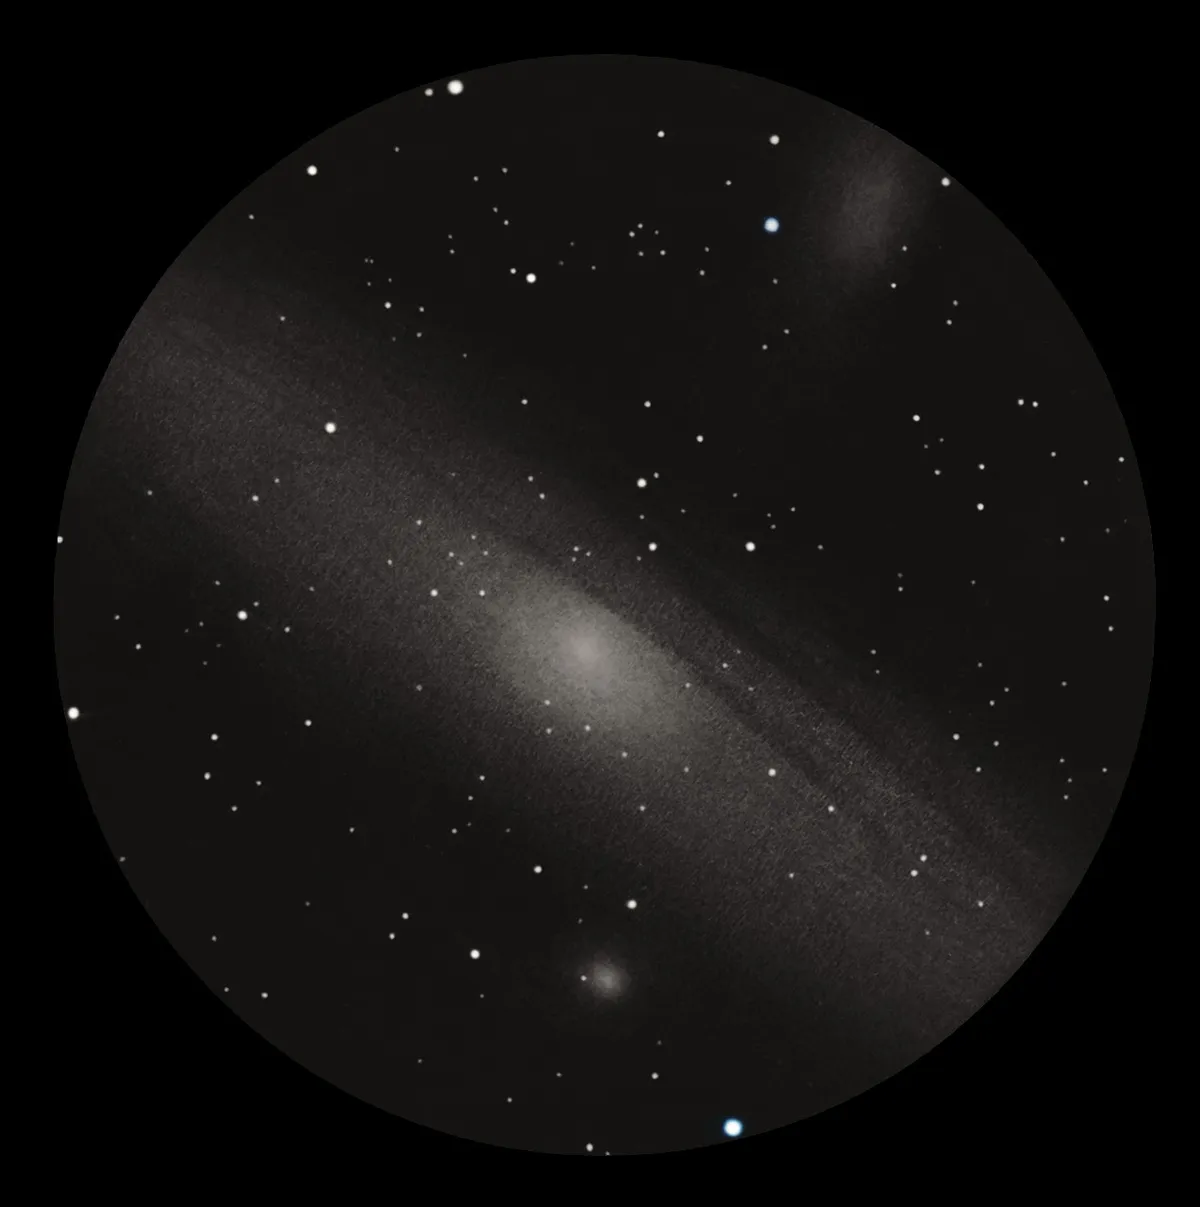  View of the Andromeda Galaxy through an 8-inch telescope, 40x magnification. Credit: Michael Vlasov